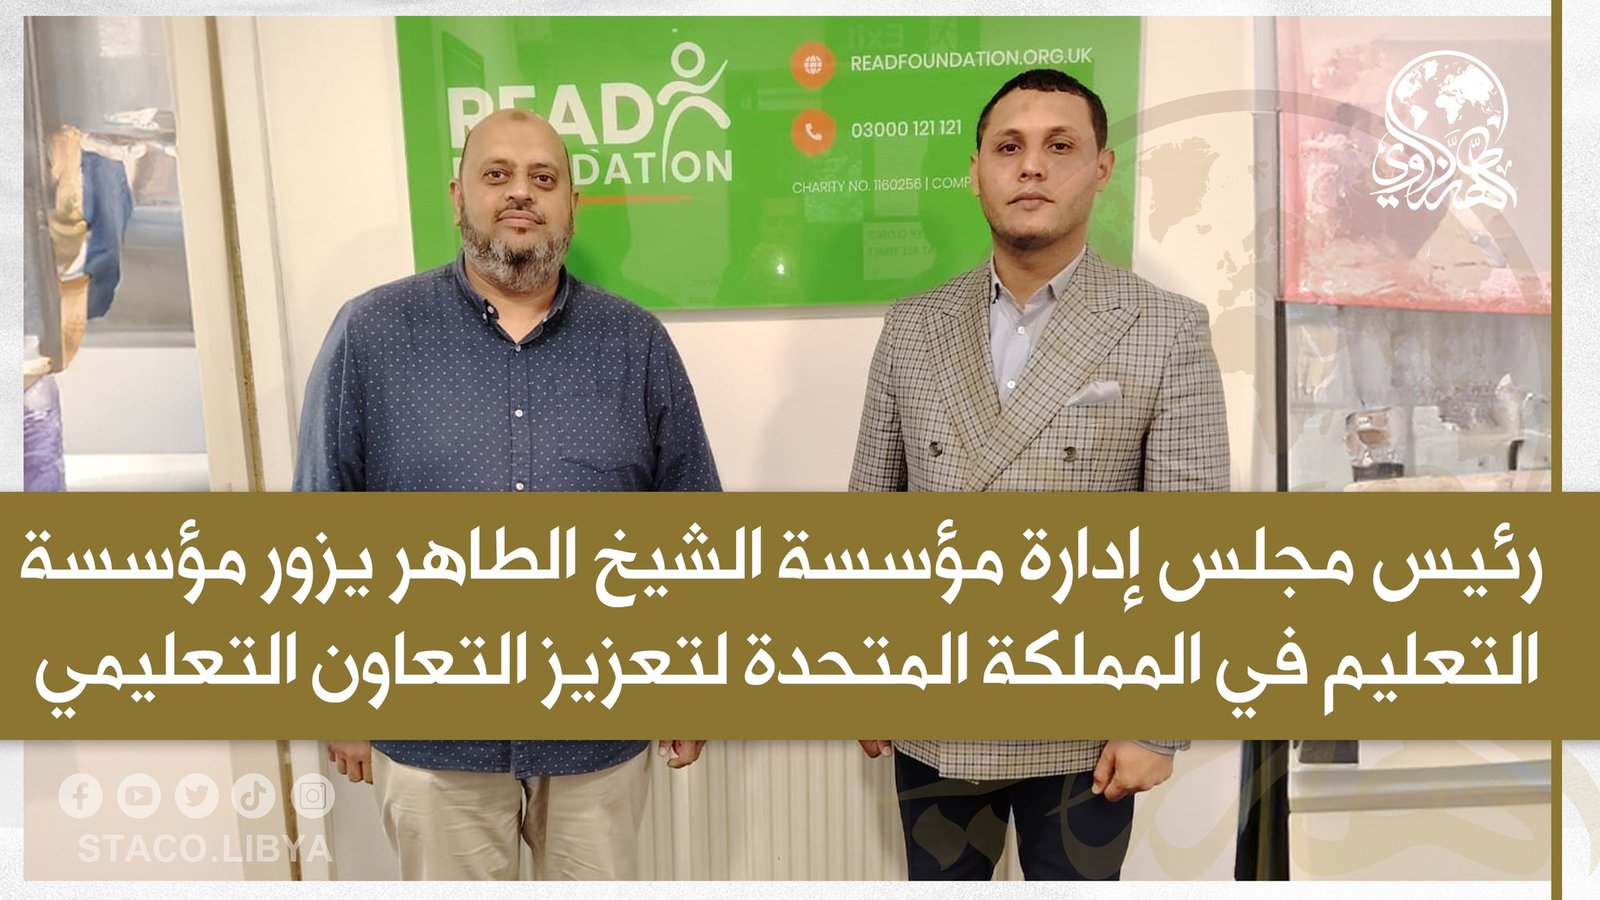 Chairman of the Board of Directors of the Sheikh Tahir Al-Zzawi organization visits the UK Education Foundation to enhance educational cooperation